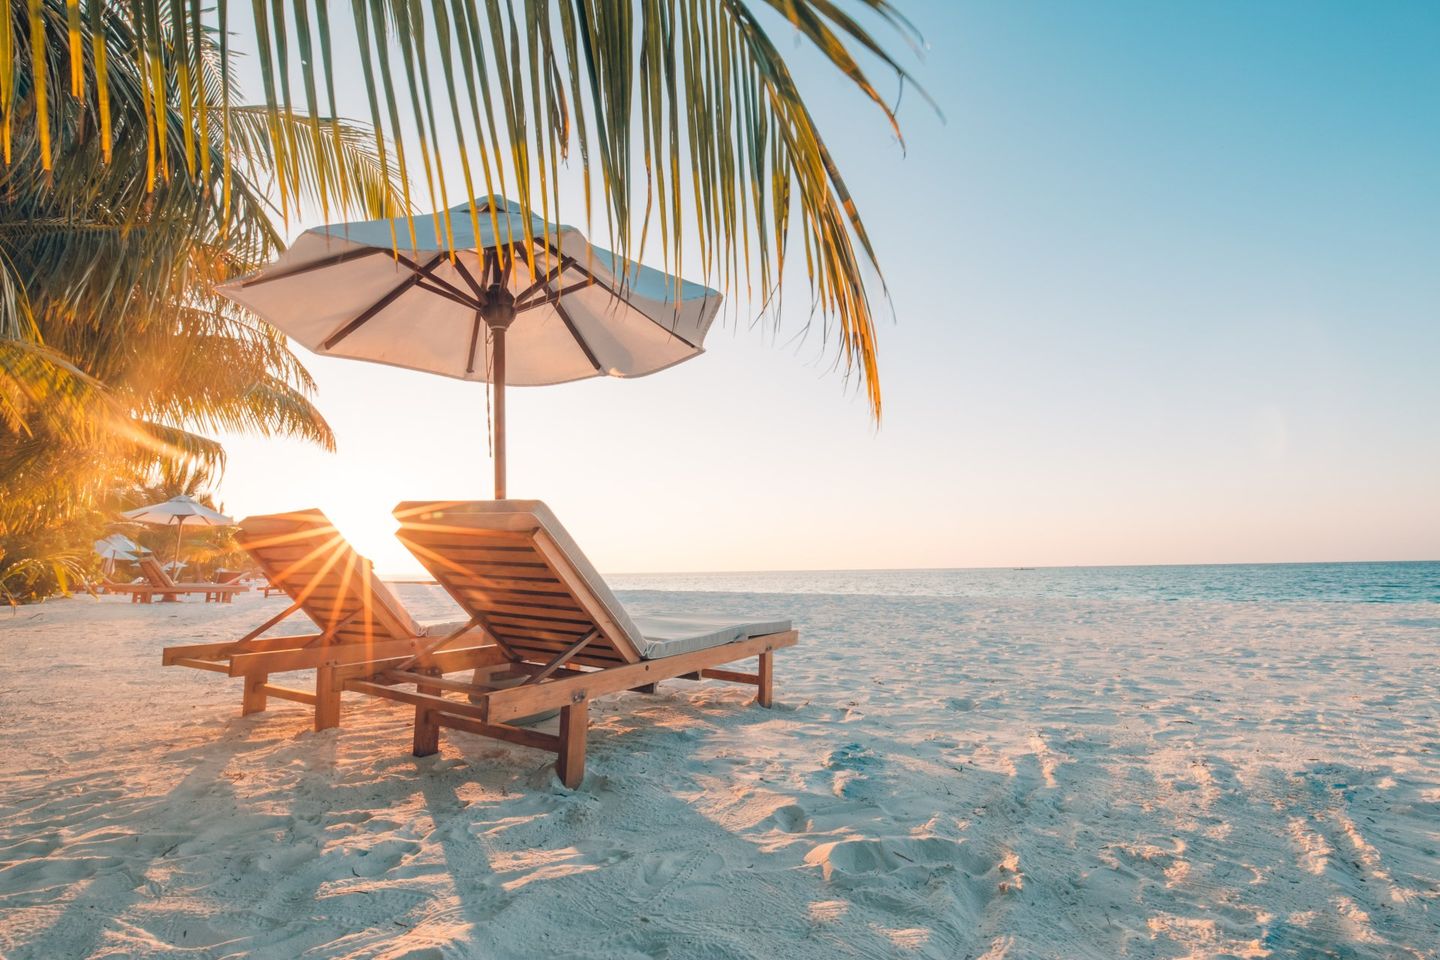 lounge chairs on the beach under a palm tree during sunrise